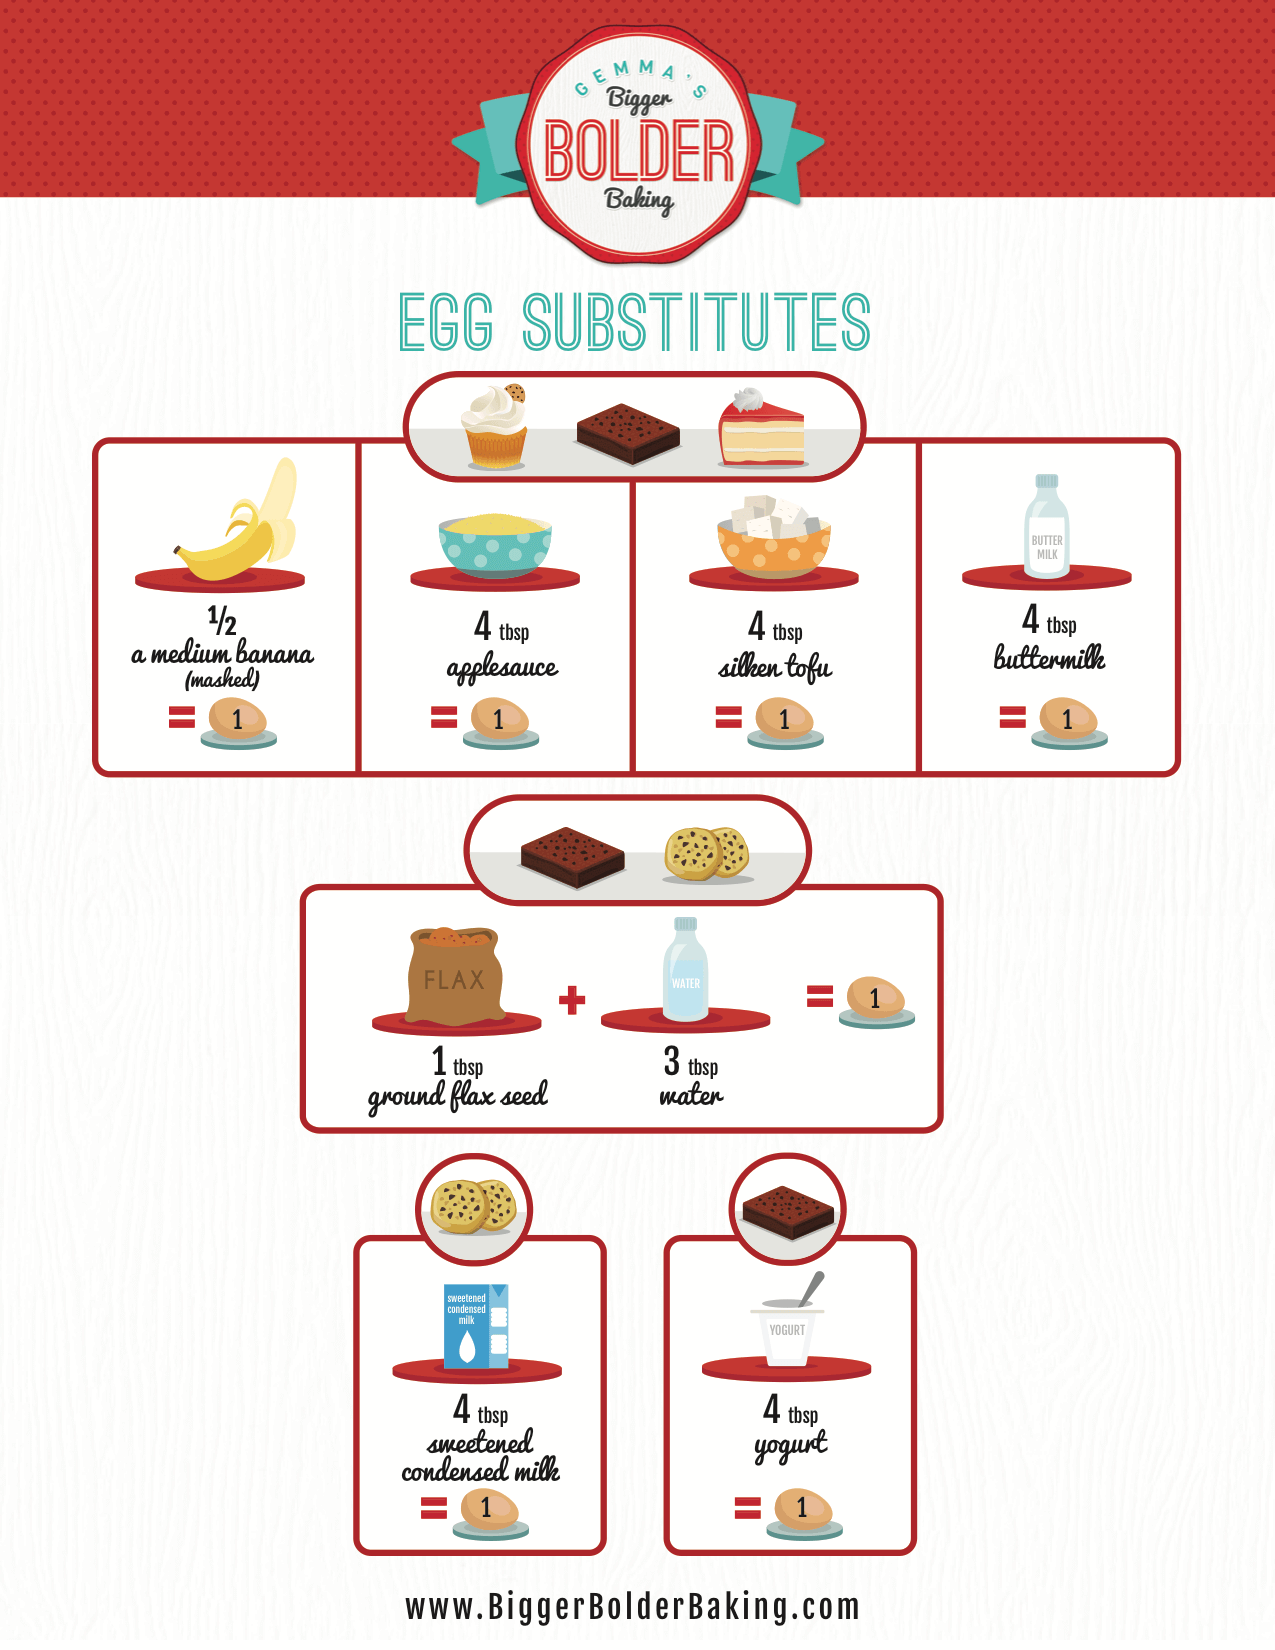 Egg Substitutes chart, showing the best egg substitutes for baking!